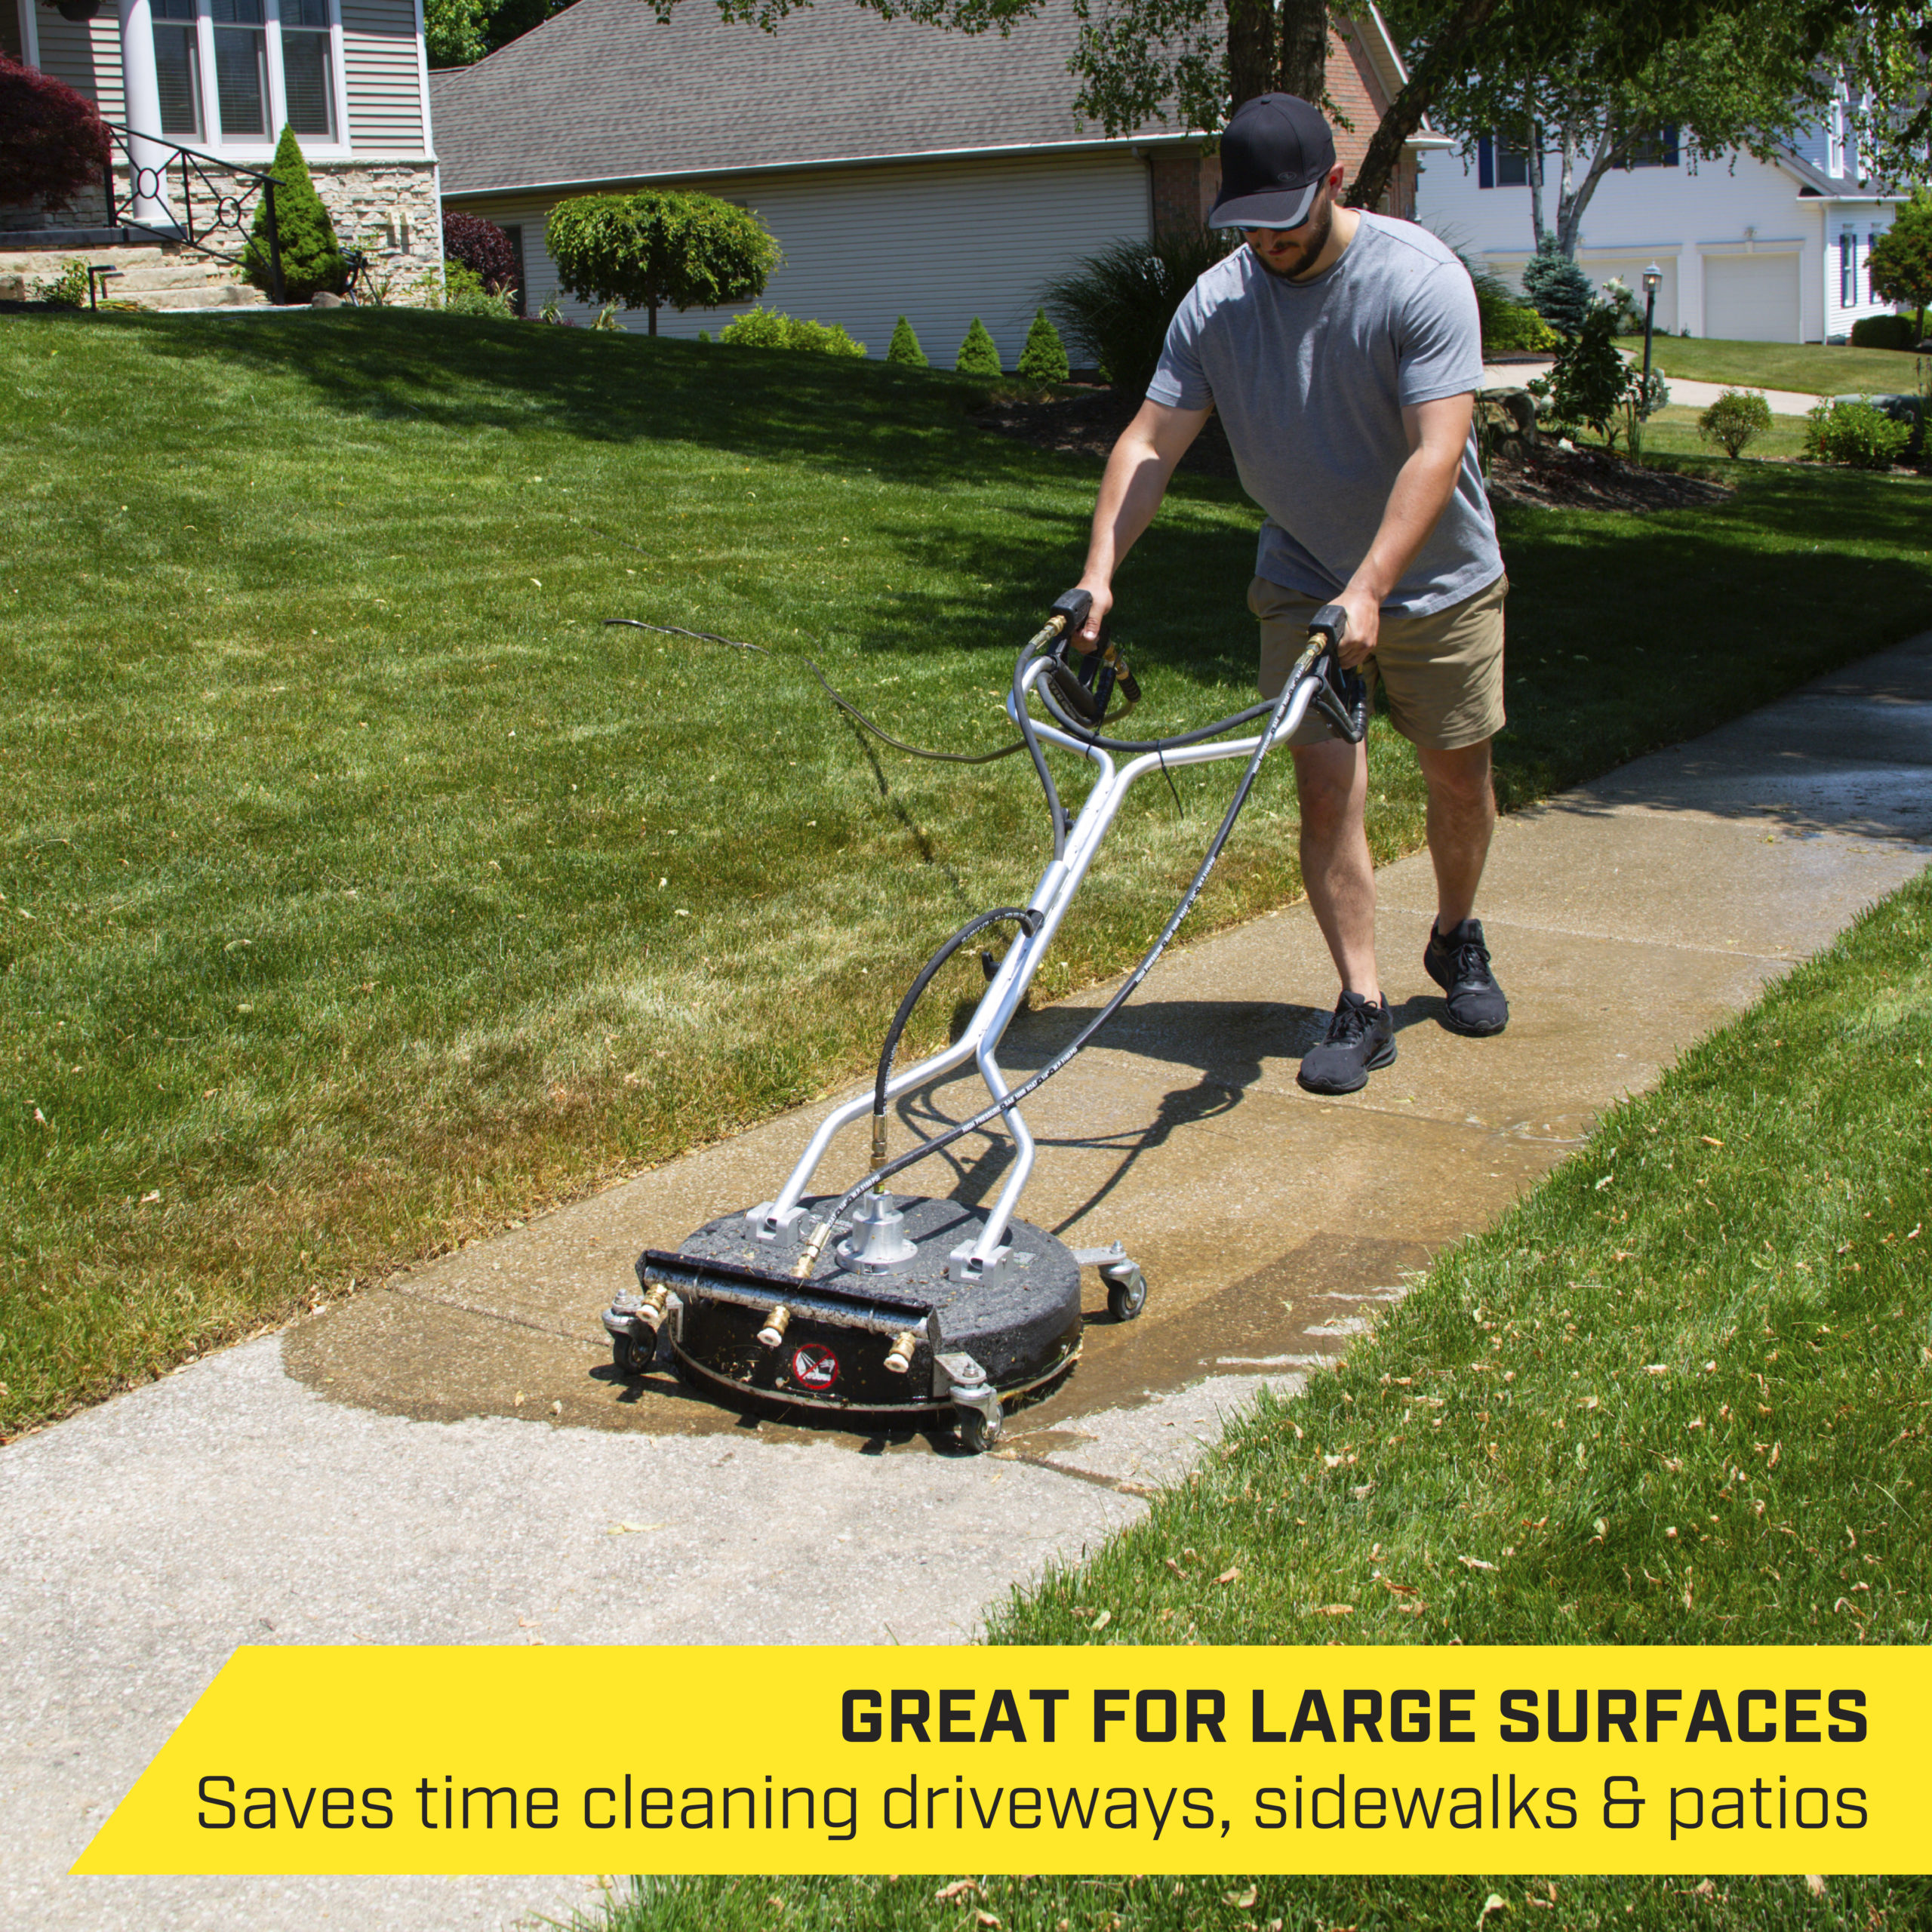 SurfaceMaxx 14-inch Water Broom and Undercarriage Cleaner